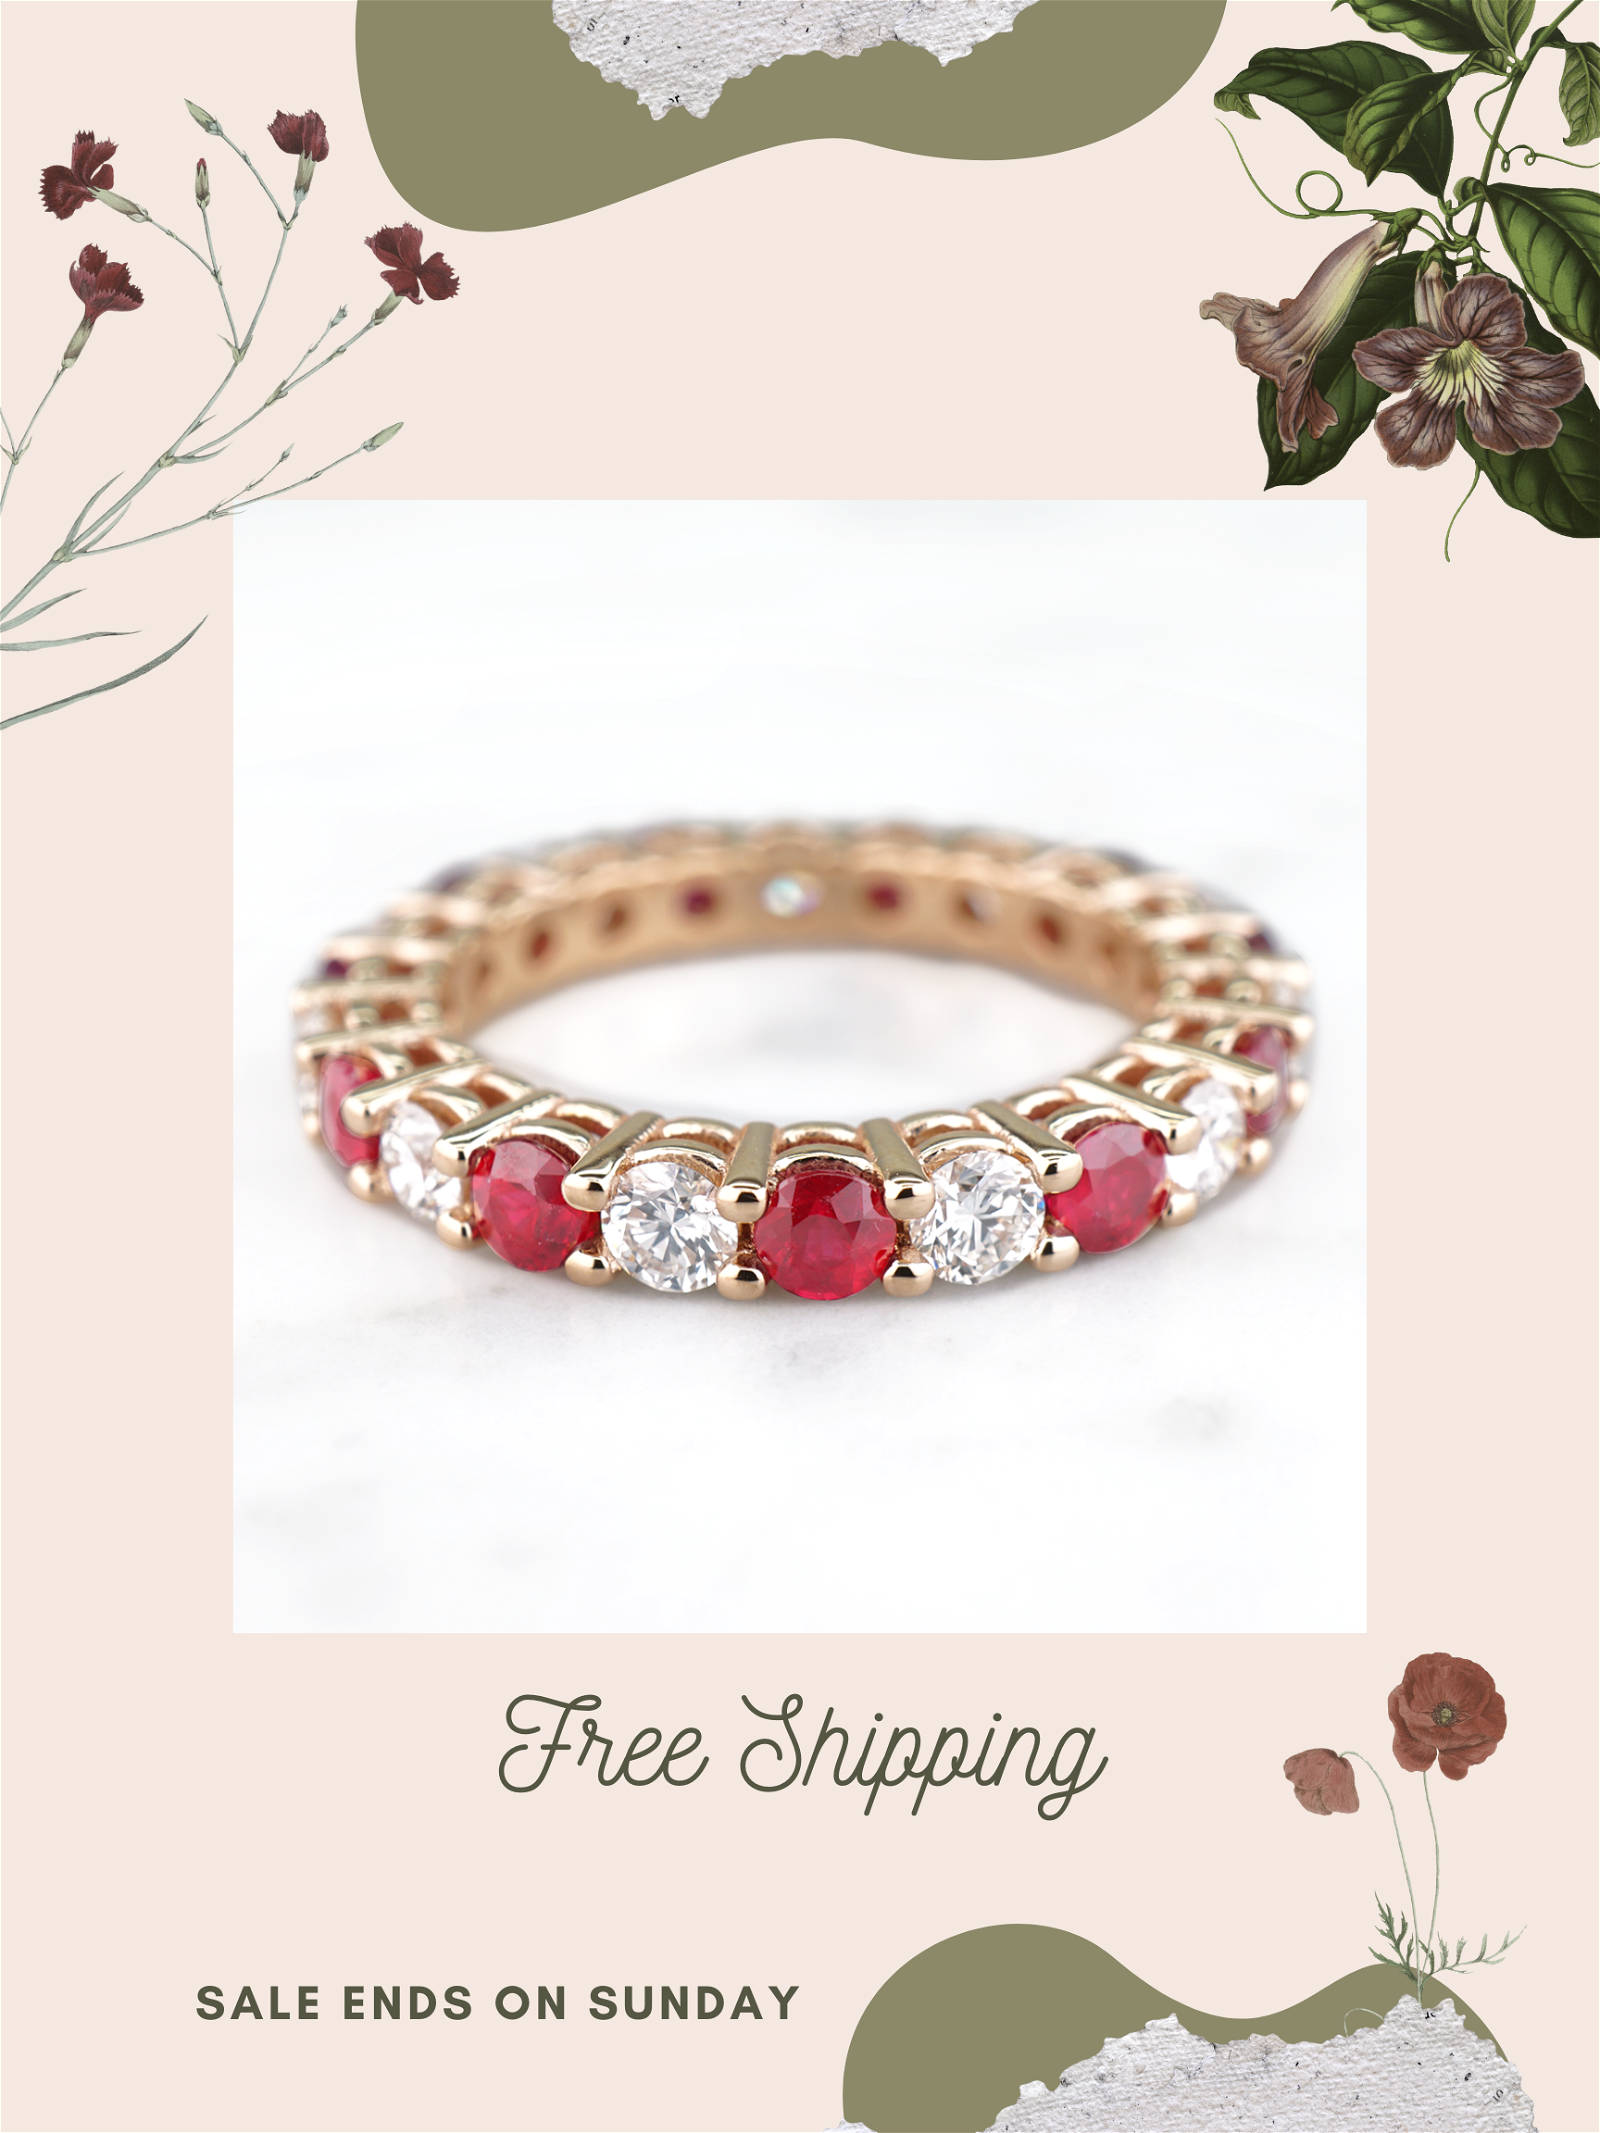  Ruby Rose Gold Band in 14k - Eternity Zalara Diamond Band Ruby Rose Gold Band in 14k - Eternity Zalara Diamond Band Ruby Rose Gold Band in 14k - Eternity Zalara Diamond Band Ruby Rose Gold Band in 14k - Eternity Zalara Diamond Band Ruby Rose Gold Band in 14k - Eternity Zalara Diamond Band Ruby Rose Gold Band in 14k - Eternity Zalara Diamond Band Ruby Rose Gold Band in 14k - Eternity Zalara Diamond Band Ruby Rose Gold Band in 14k - Eternity Zalara Diamond Band  Also Available in GEMSTONE COLORED CUSHION SQUARE GEMSTONE STONES COLORED EMERALD GEMSTONE COLORED HEART GEMSTONE COLORED MARQUIS GEMSTONE COLORED OVAL GEMSTONE COLORED PRINCESS GEMSTONE COLORED ROUND Ruby Rose Gold Band in 14k - Eternity Zalara Diamond Band